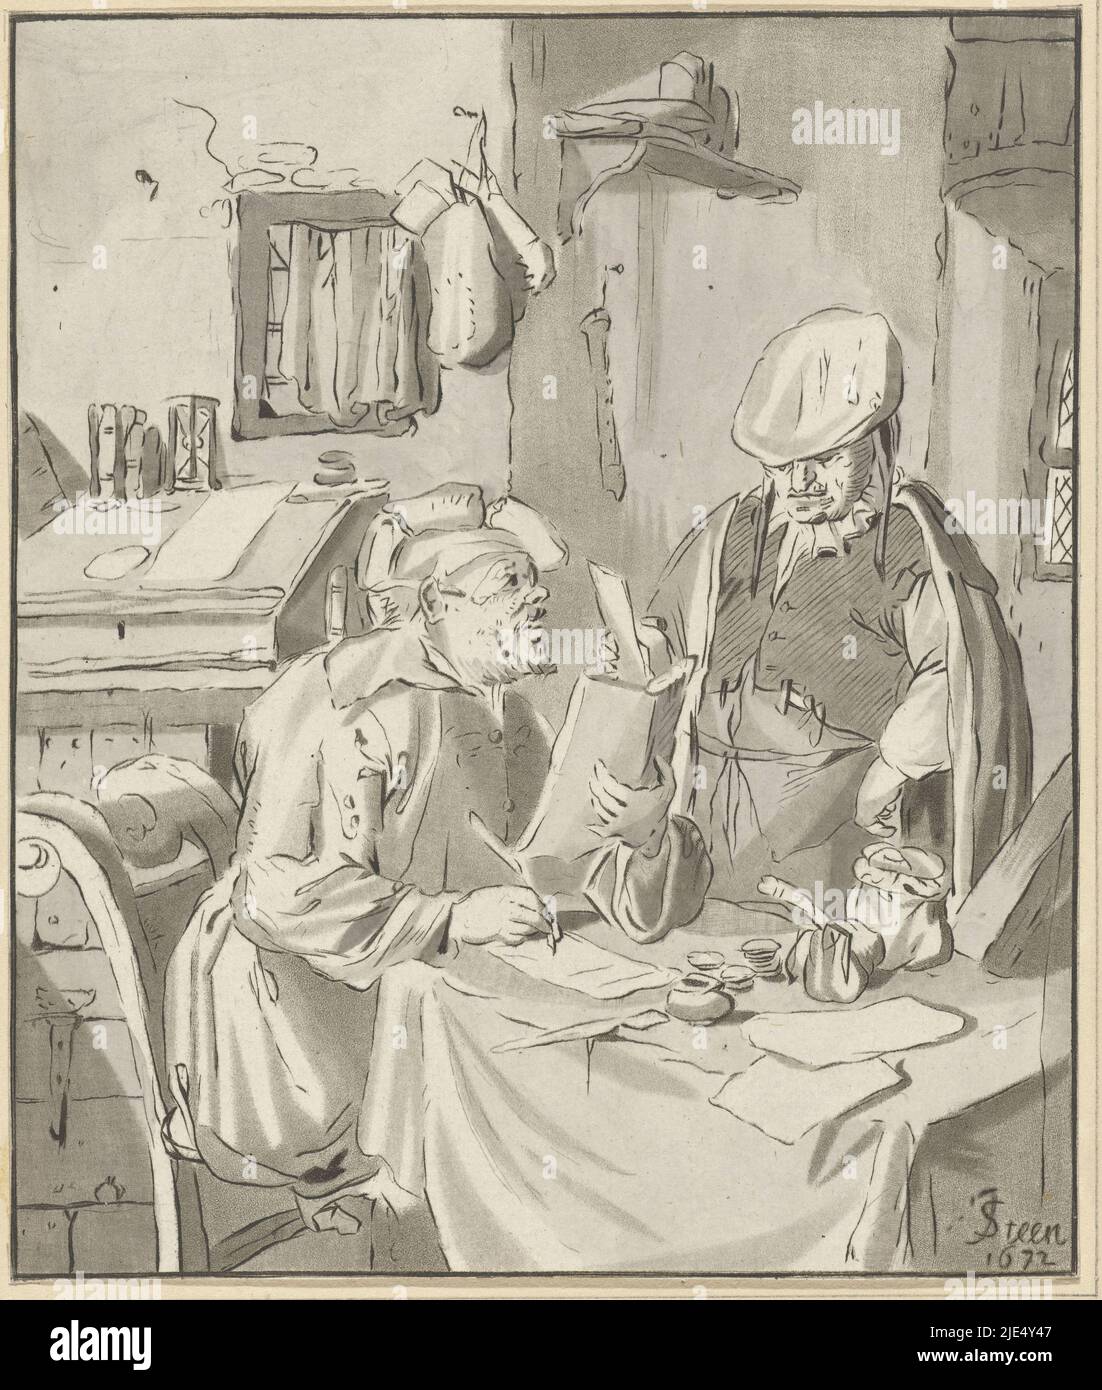 A man sitting at a table writes a letter. Next to him is a man holding a letter, Writer of a letter Recipient, Cornelis Ploos van Amstel, print maker: Bernhard Schreuder, intermediary draughtsman: Jan Havicksz. Steen, (mentioned on object), Amsterdam, 1777 - 1786, paper, etching, h 156 mm × w 132 mm Stock Photo